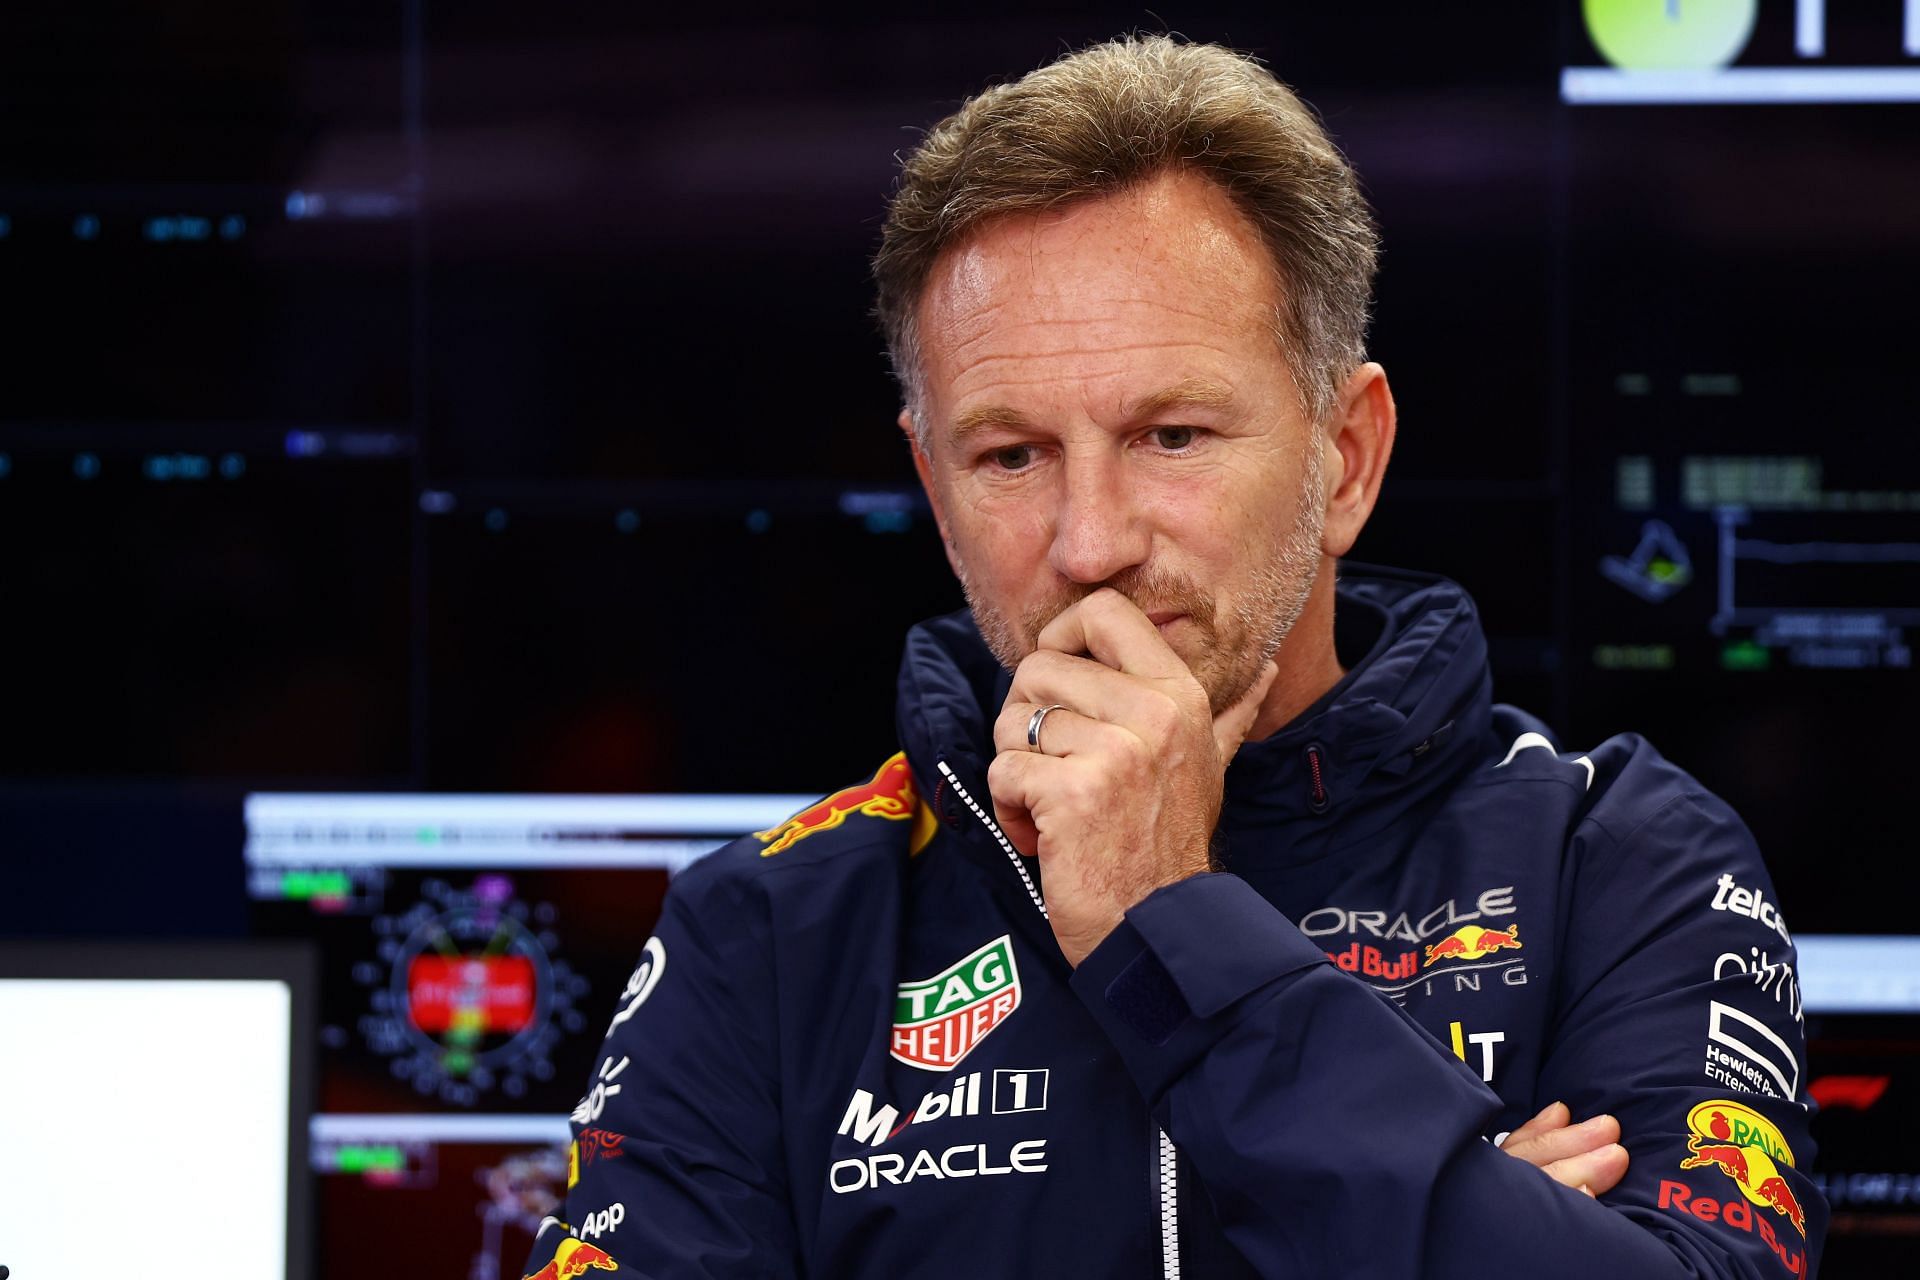 Red Bull team principal Christian Horner looks on in the paddock during the 2022 F1 Hungarian GP weekend. (Photo by Mark Thompson/Getty Images)